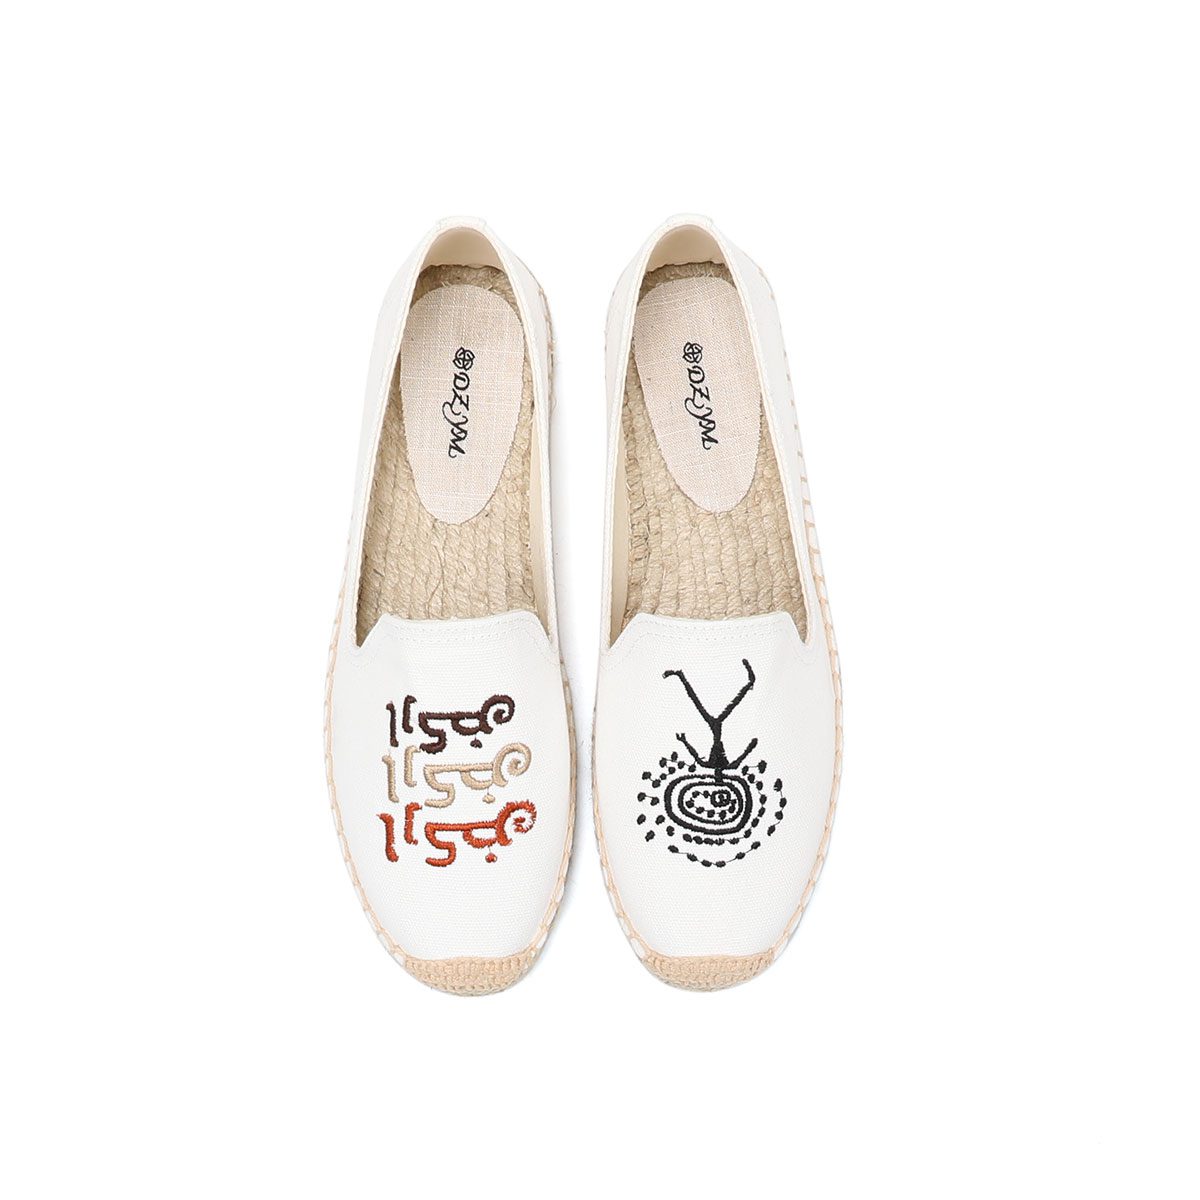 Personality fashion new style flat shoes Personality embroidery non-slip women's flat espadrilles